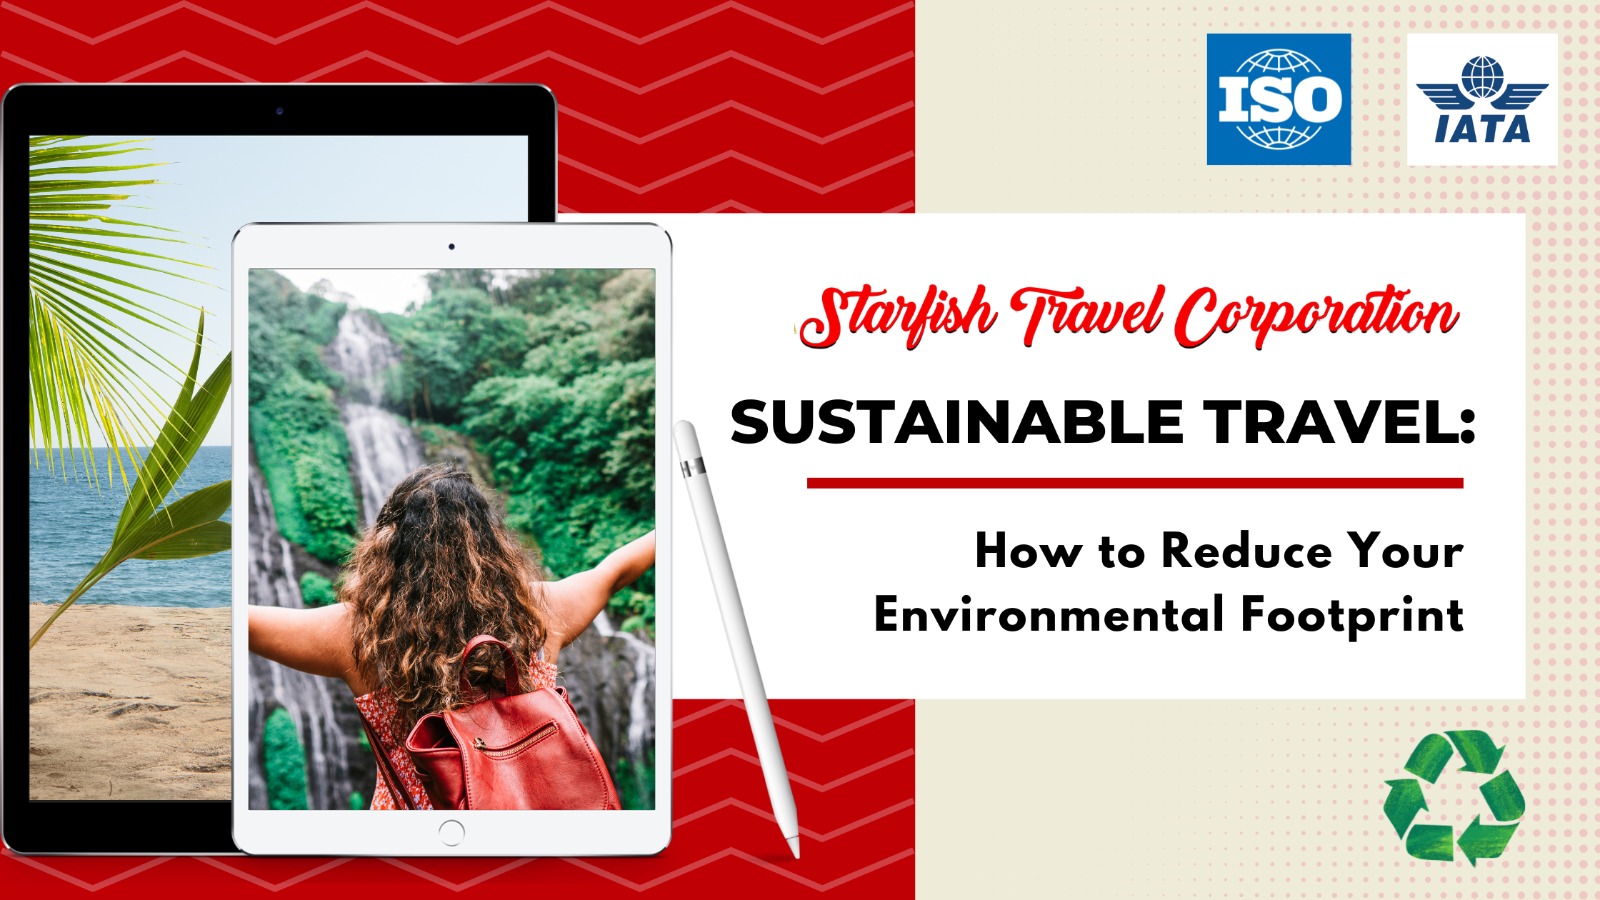 Sustainable Travel: How to Reduce Your Environmental Footprint